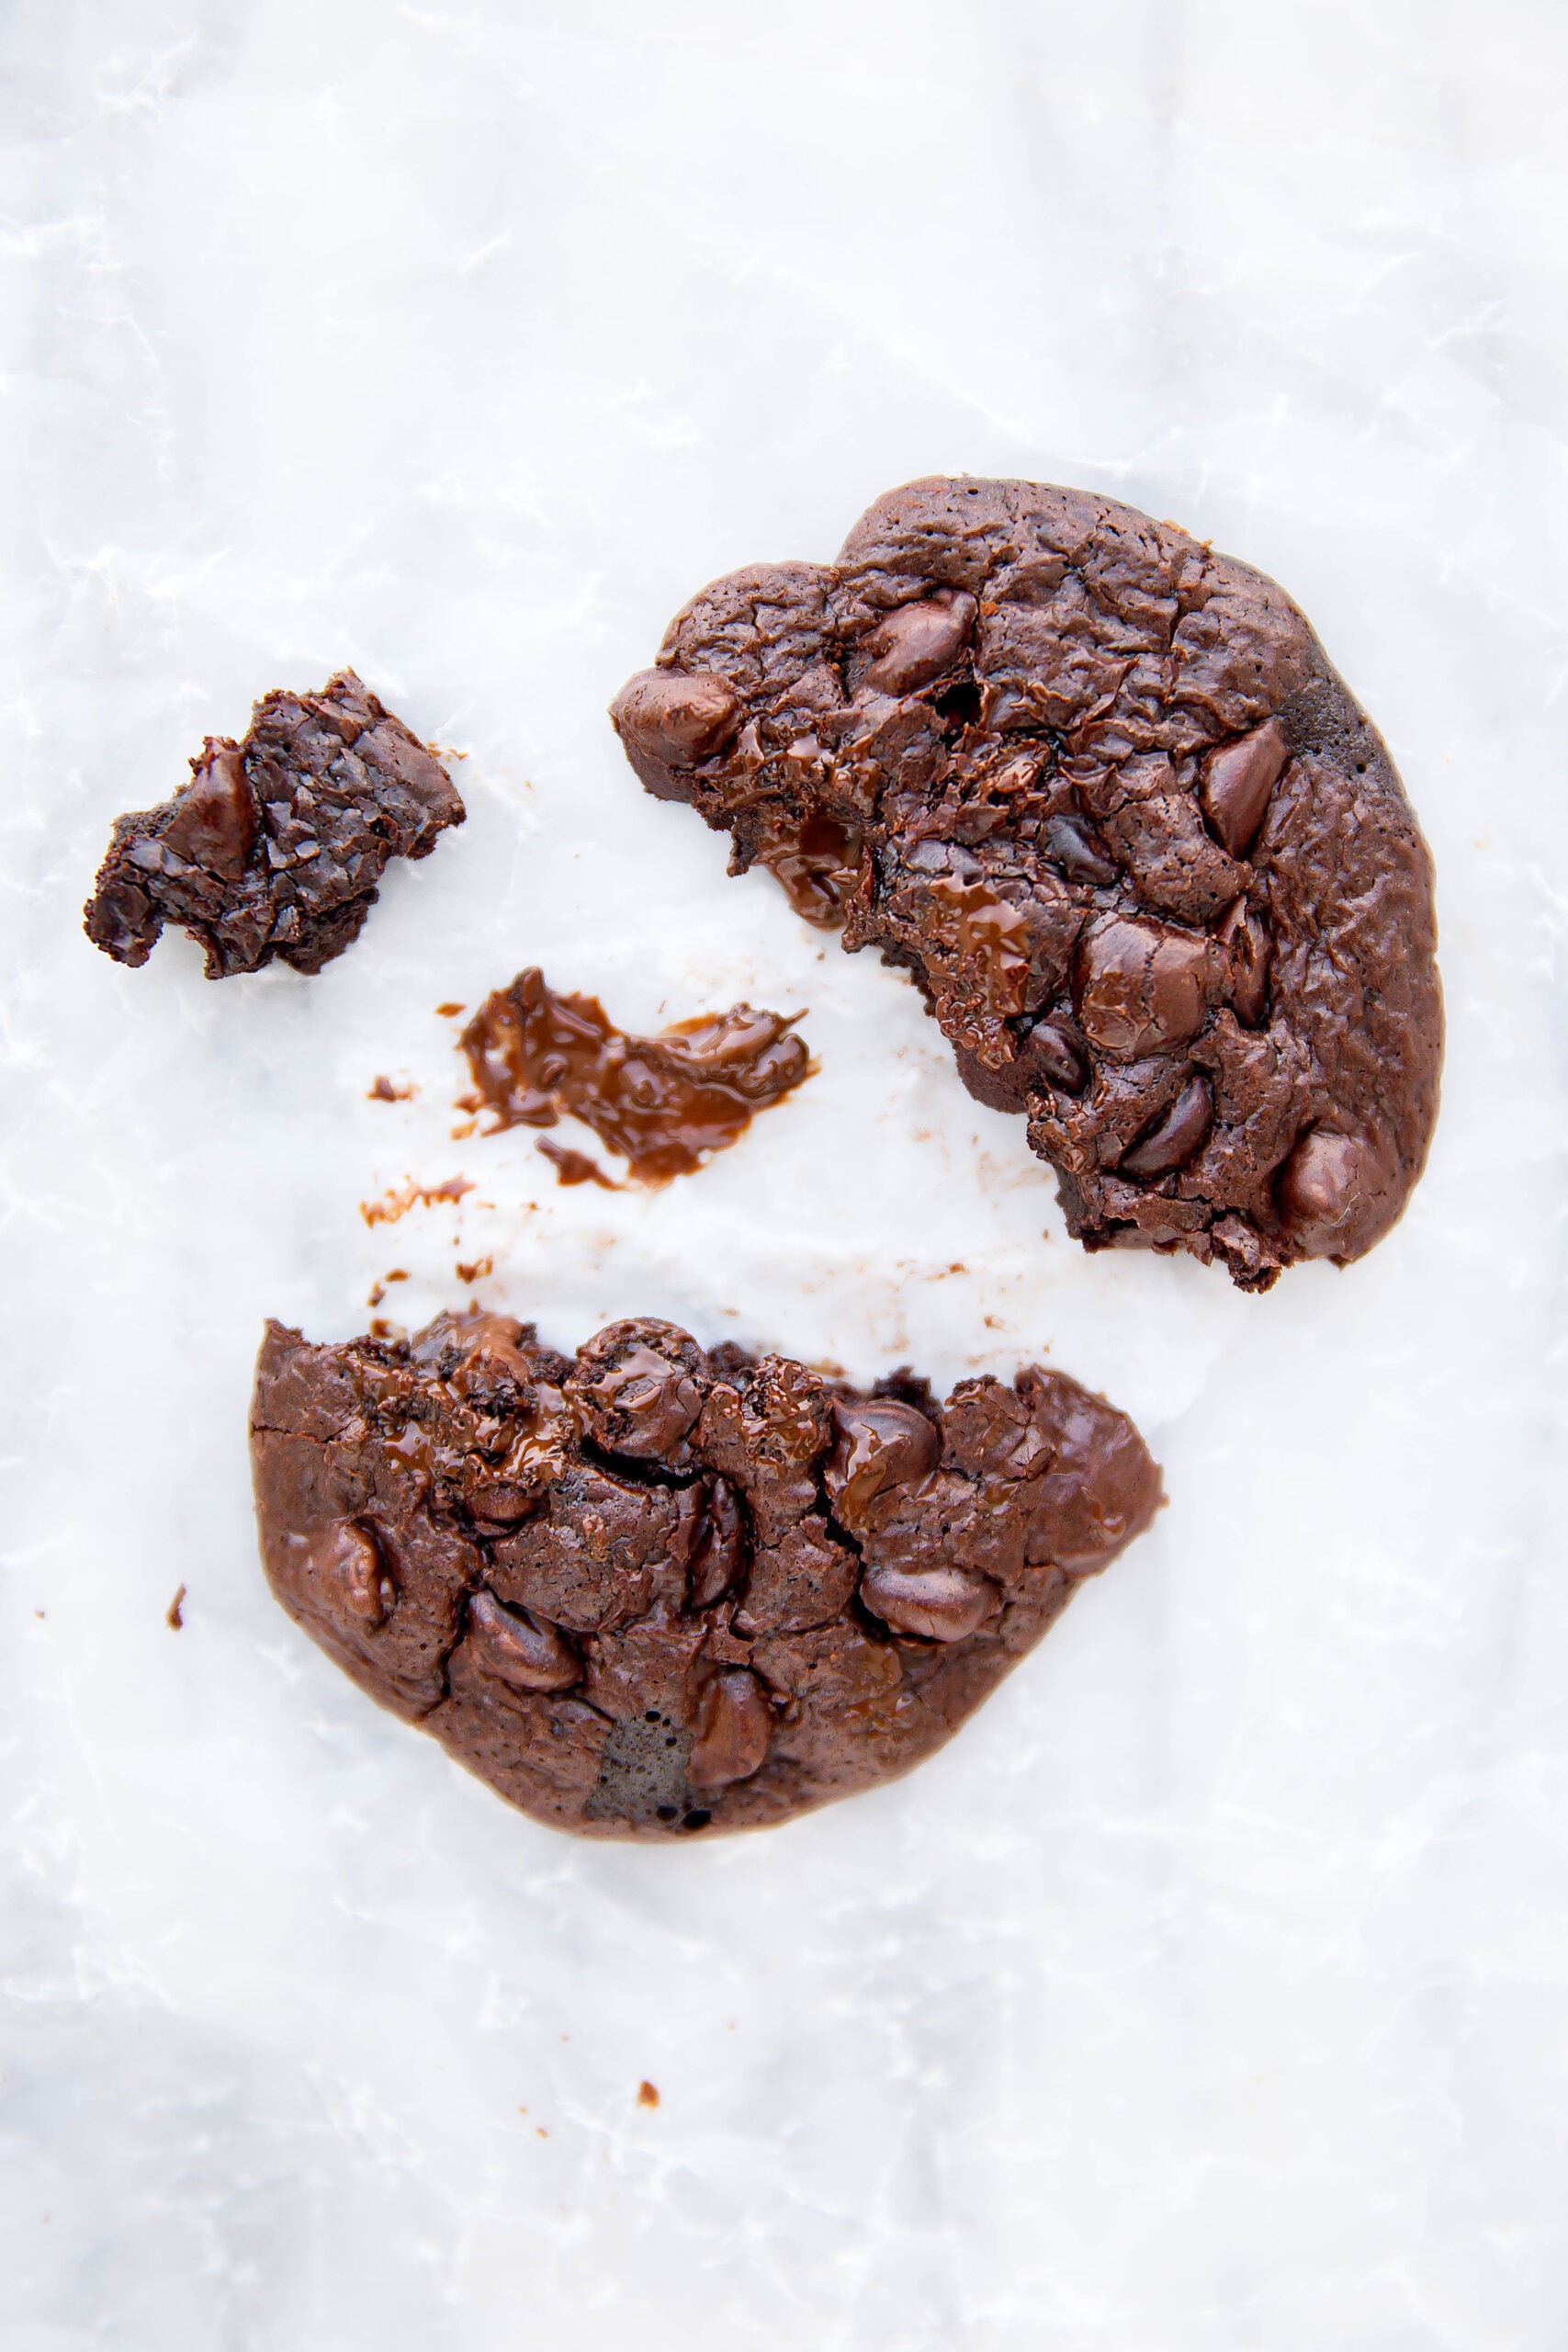 Fudgy and soft, these Flourless Chocolate Cookies will satisfy anyone's sweet tooth!